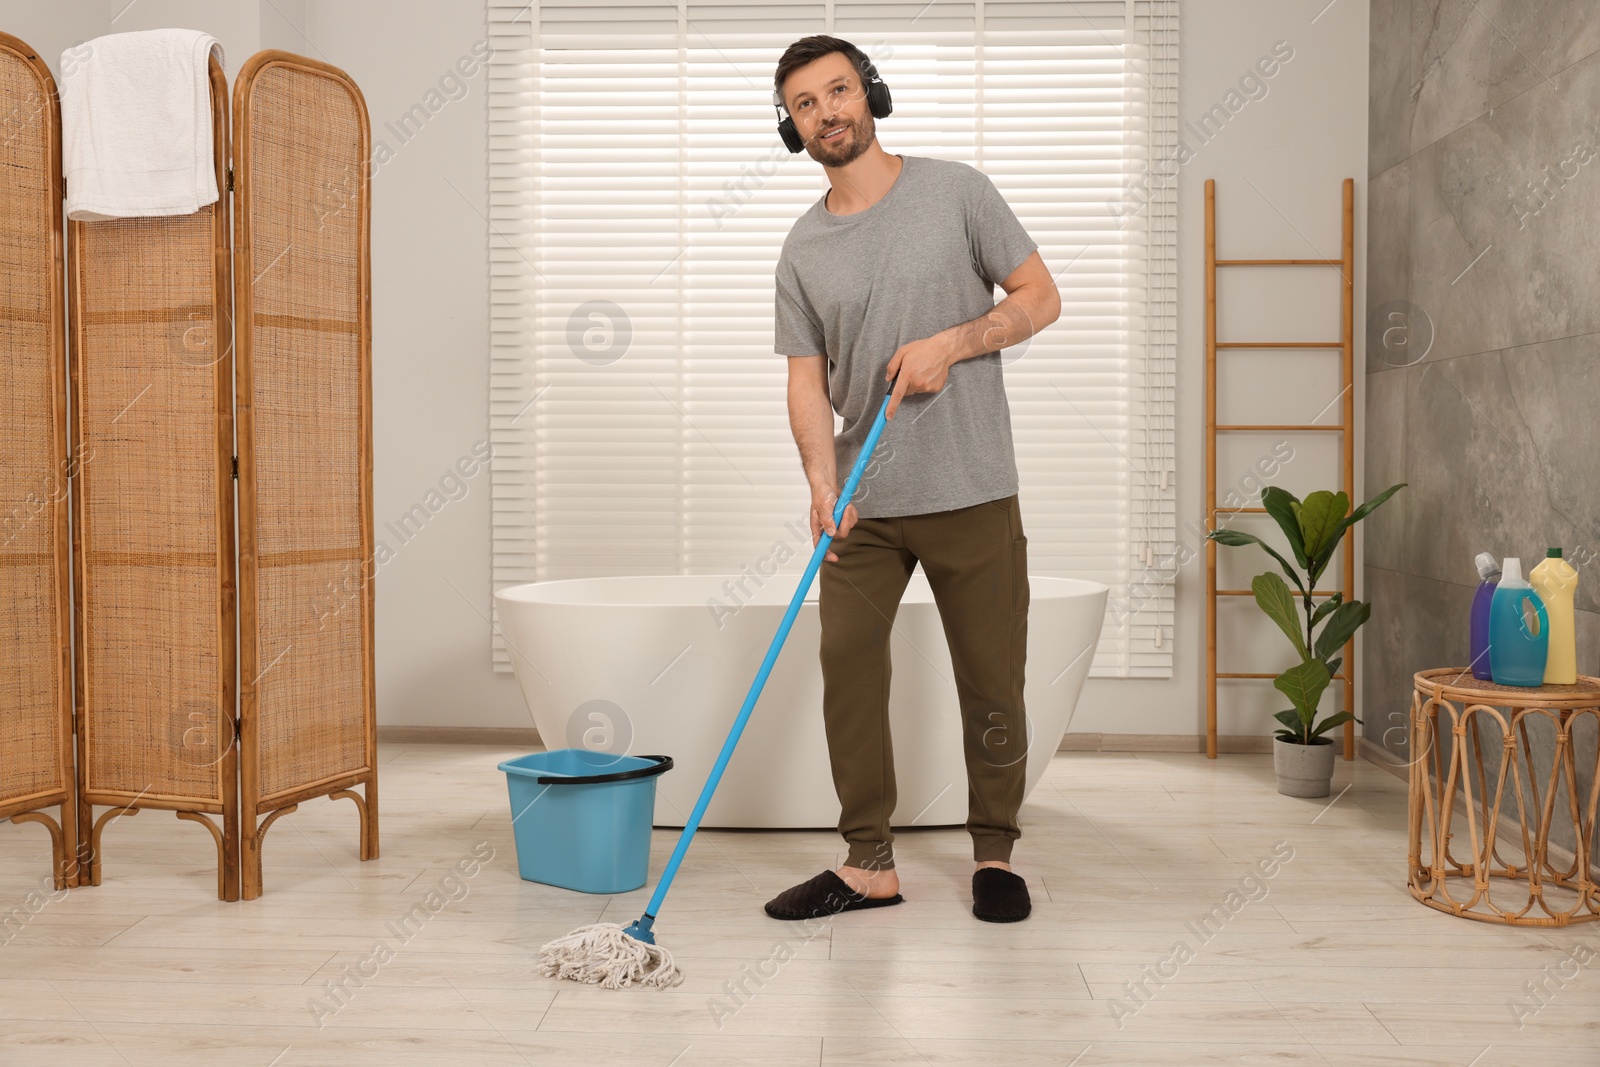 Photo of Enjoying cleaning. Man in headphones listening to music and mopping floor in bathroom